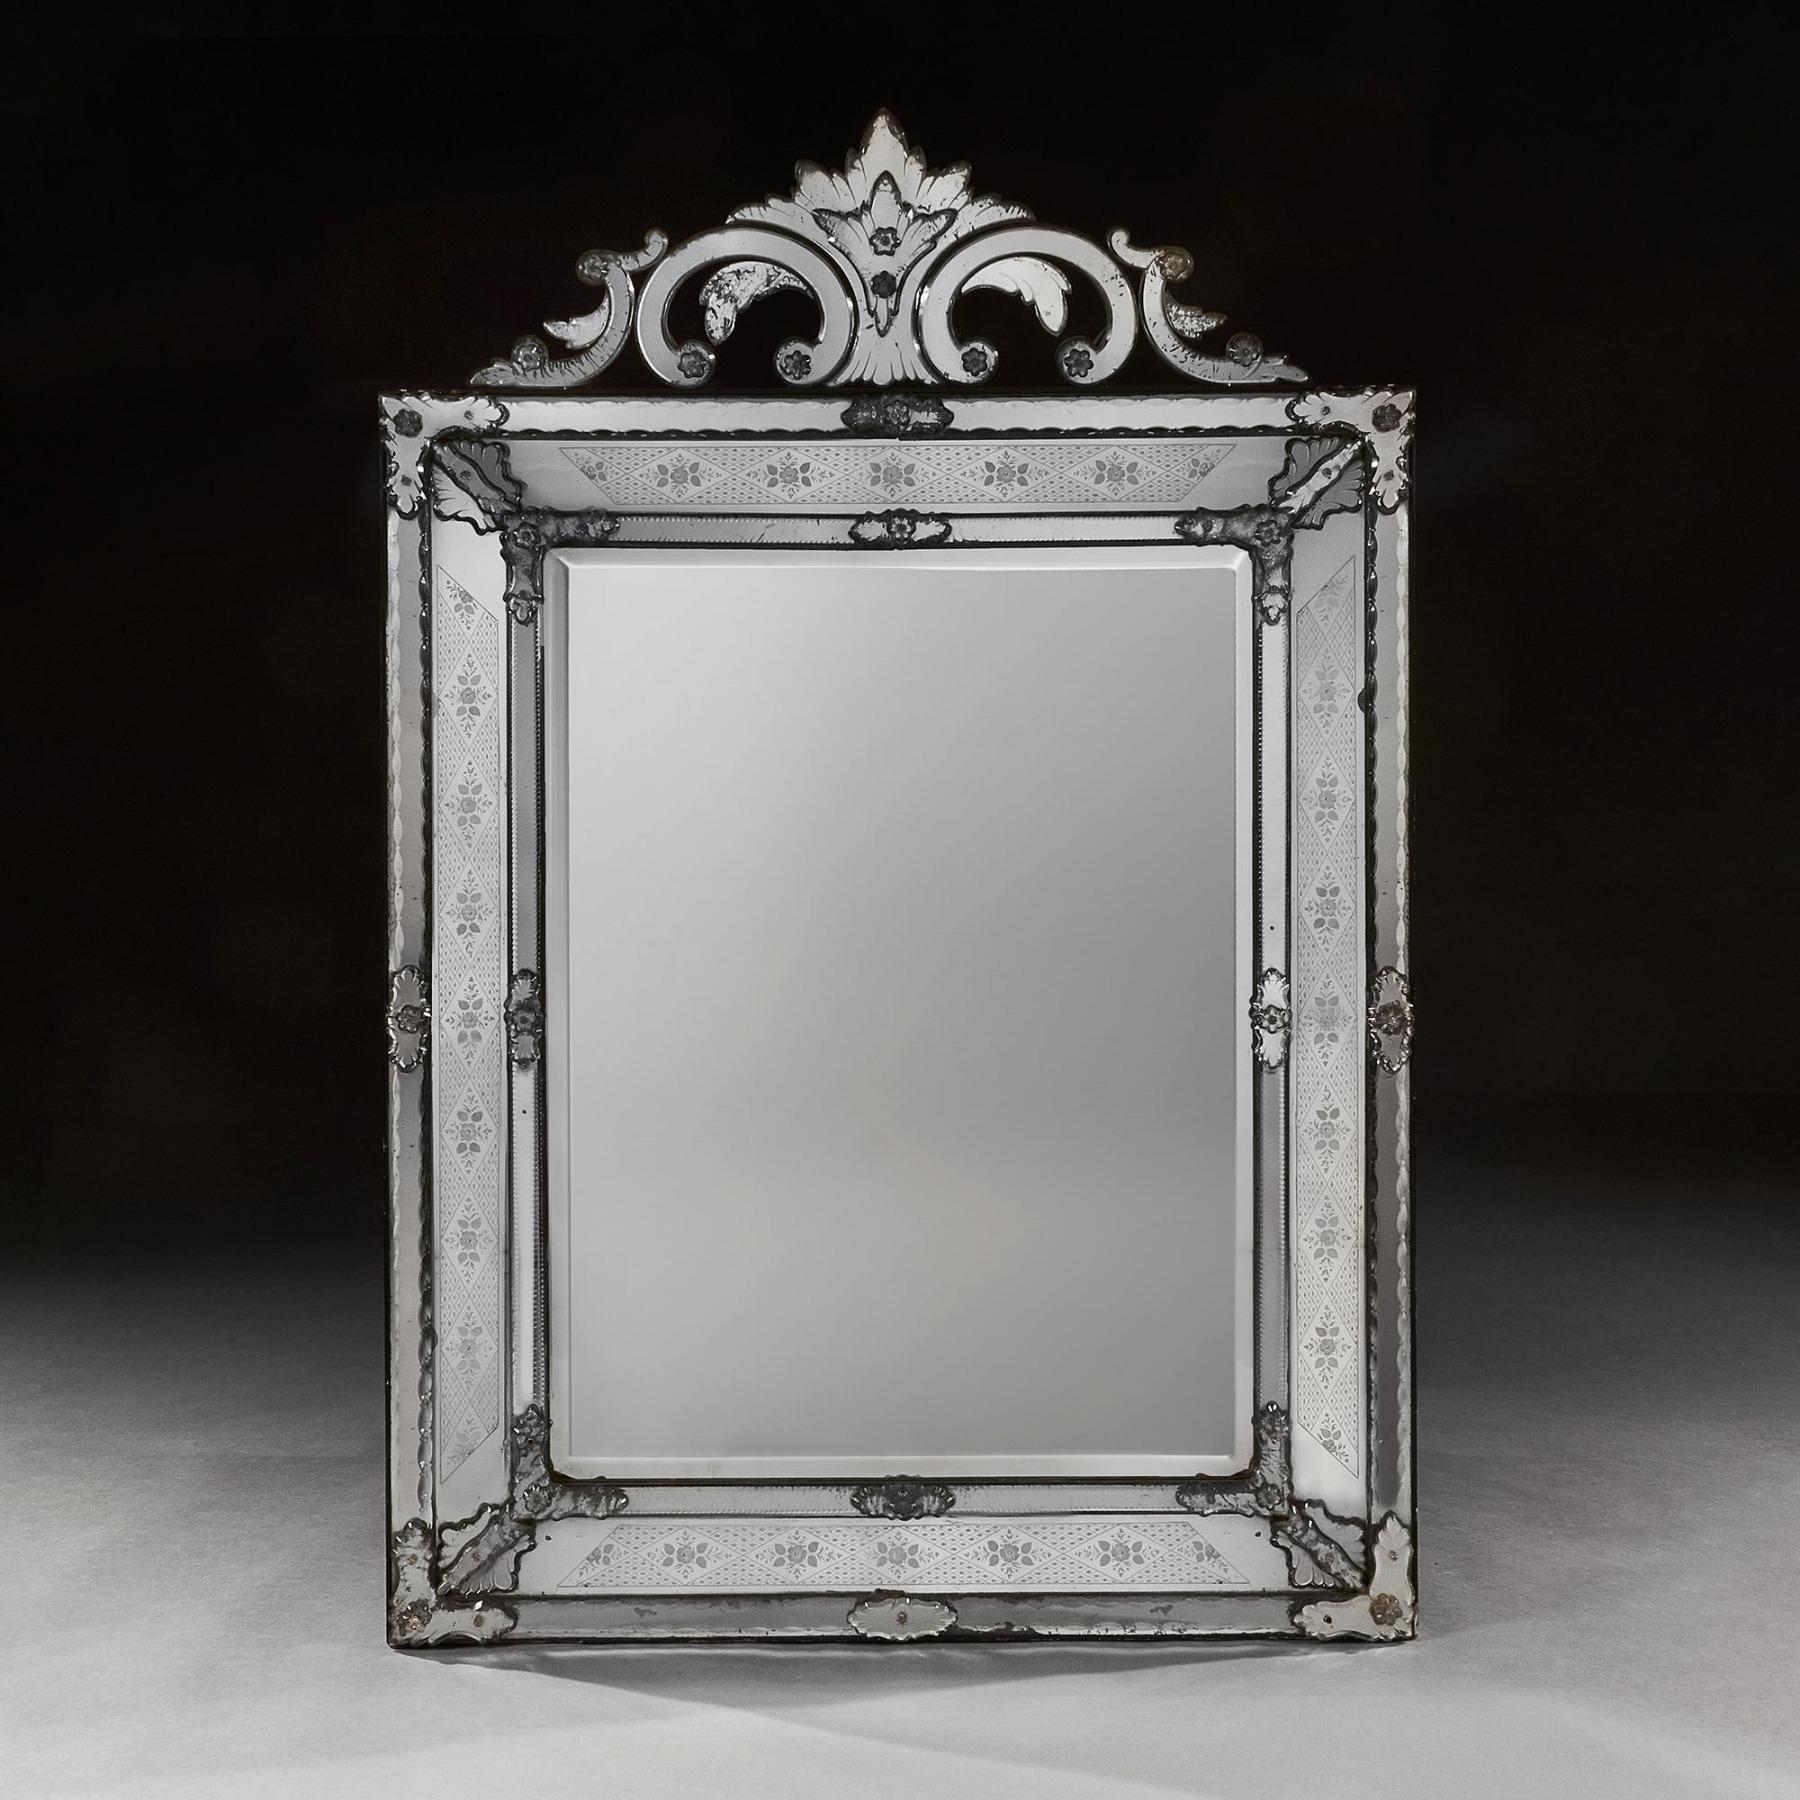 A wonderful and imposing Venetian Murano Etched glass mirror of Grand Proportions and Baroque design.



Italy Venice-Murano circa 1850. 





Outstanding quality and rare to find of this scale at 5ft 4 inches . The mirrored crest formed